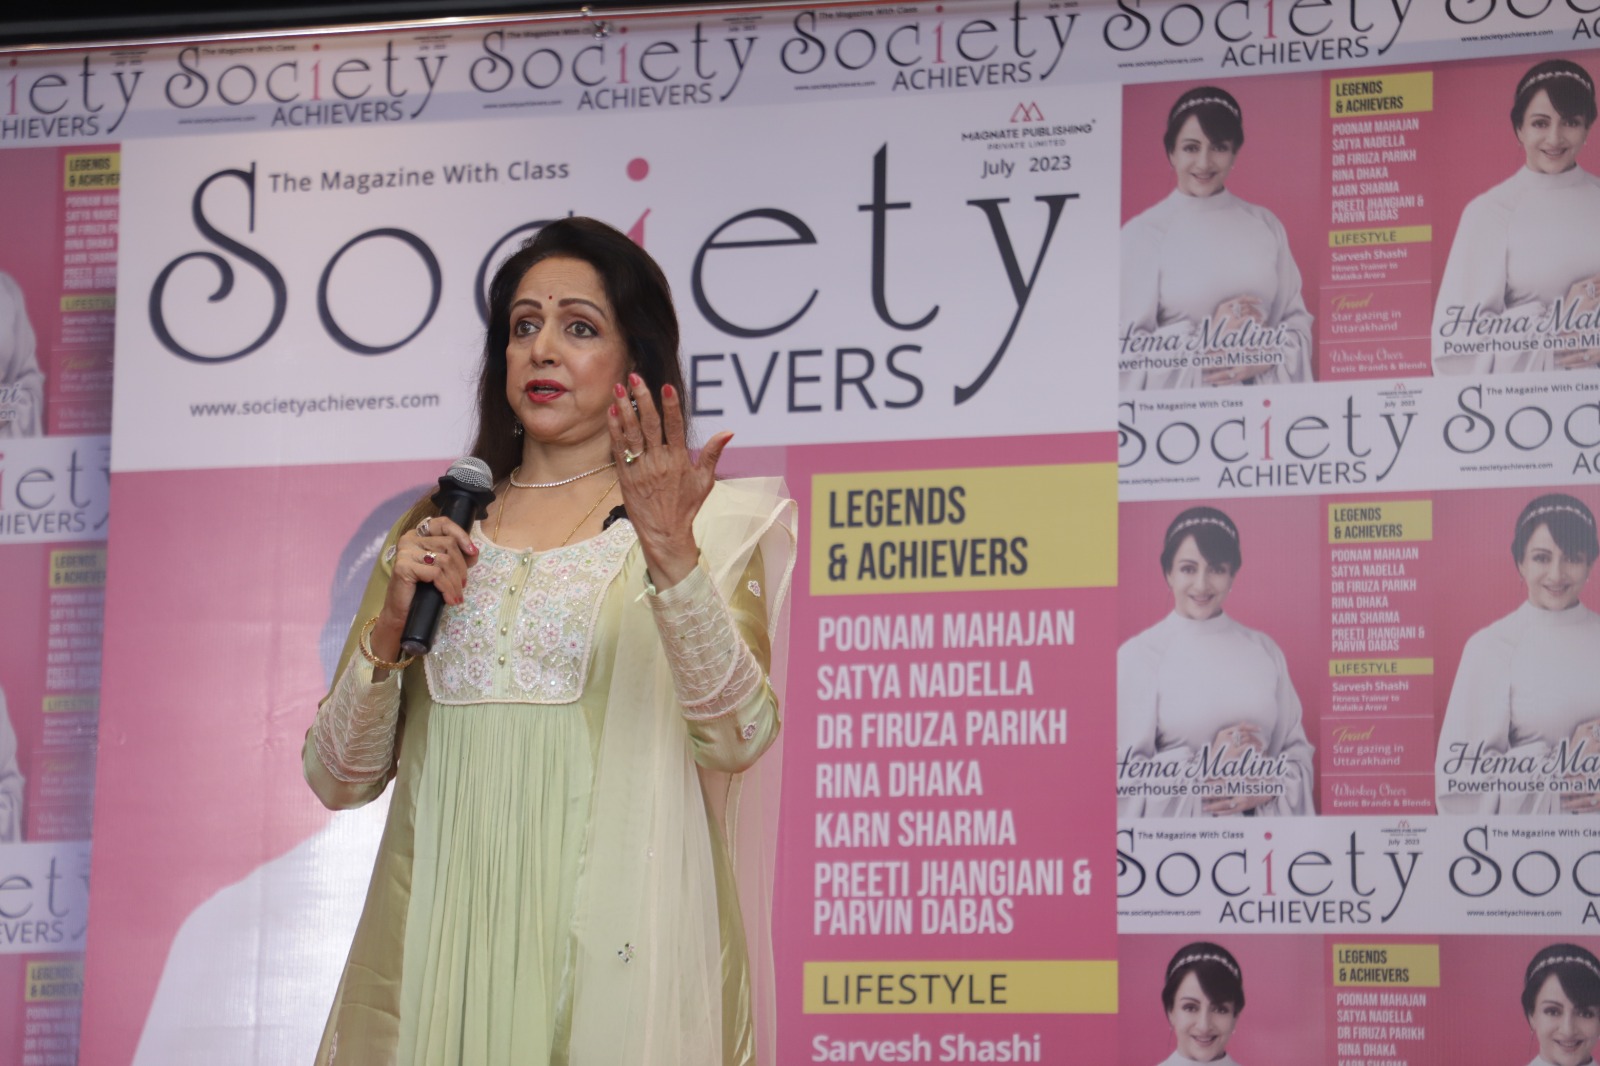 Hema Malini unveiled the cover of 'Society Achievers